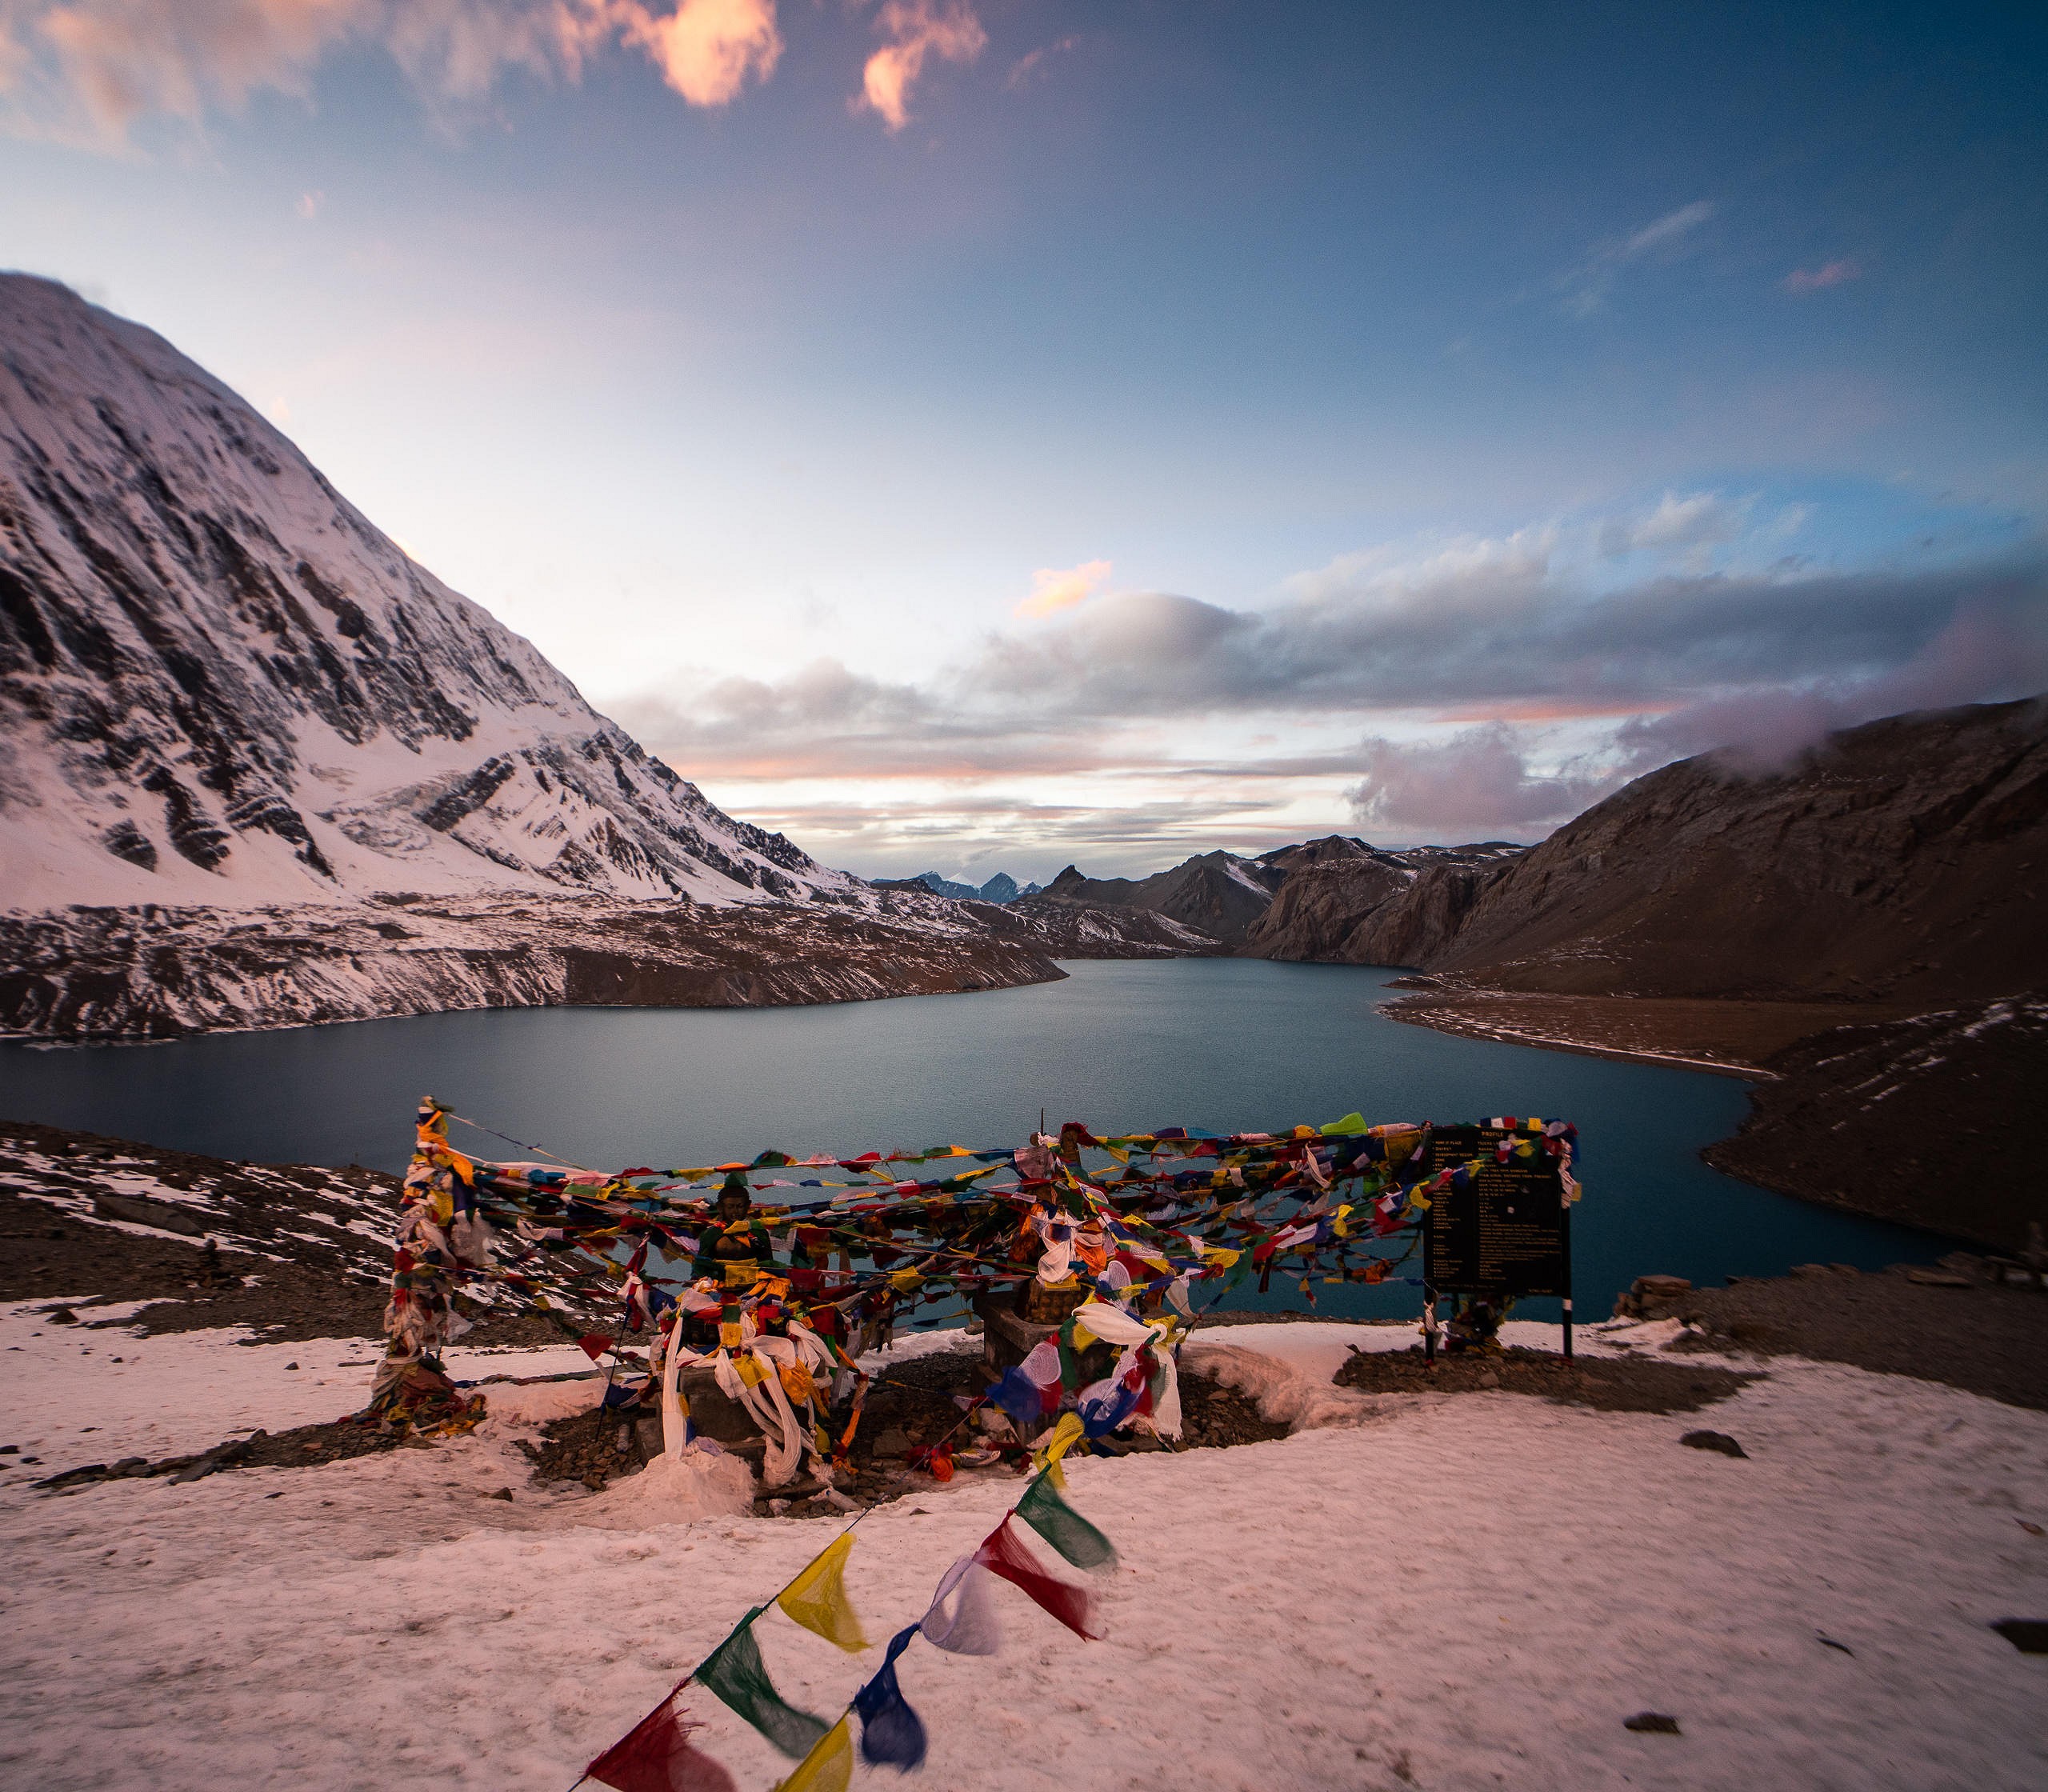 The Tilicho lake in ACT trekking.  © roob123